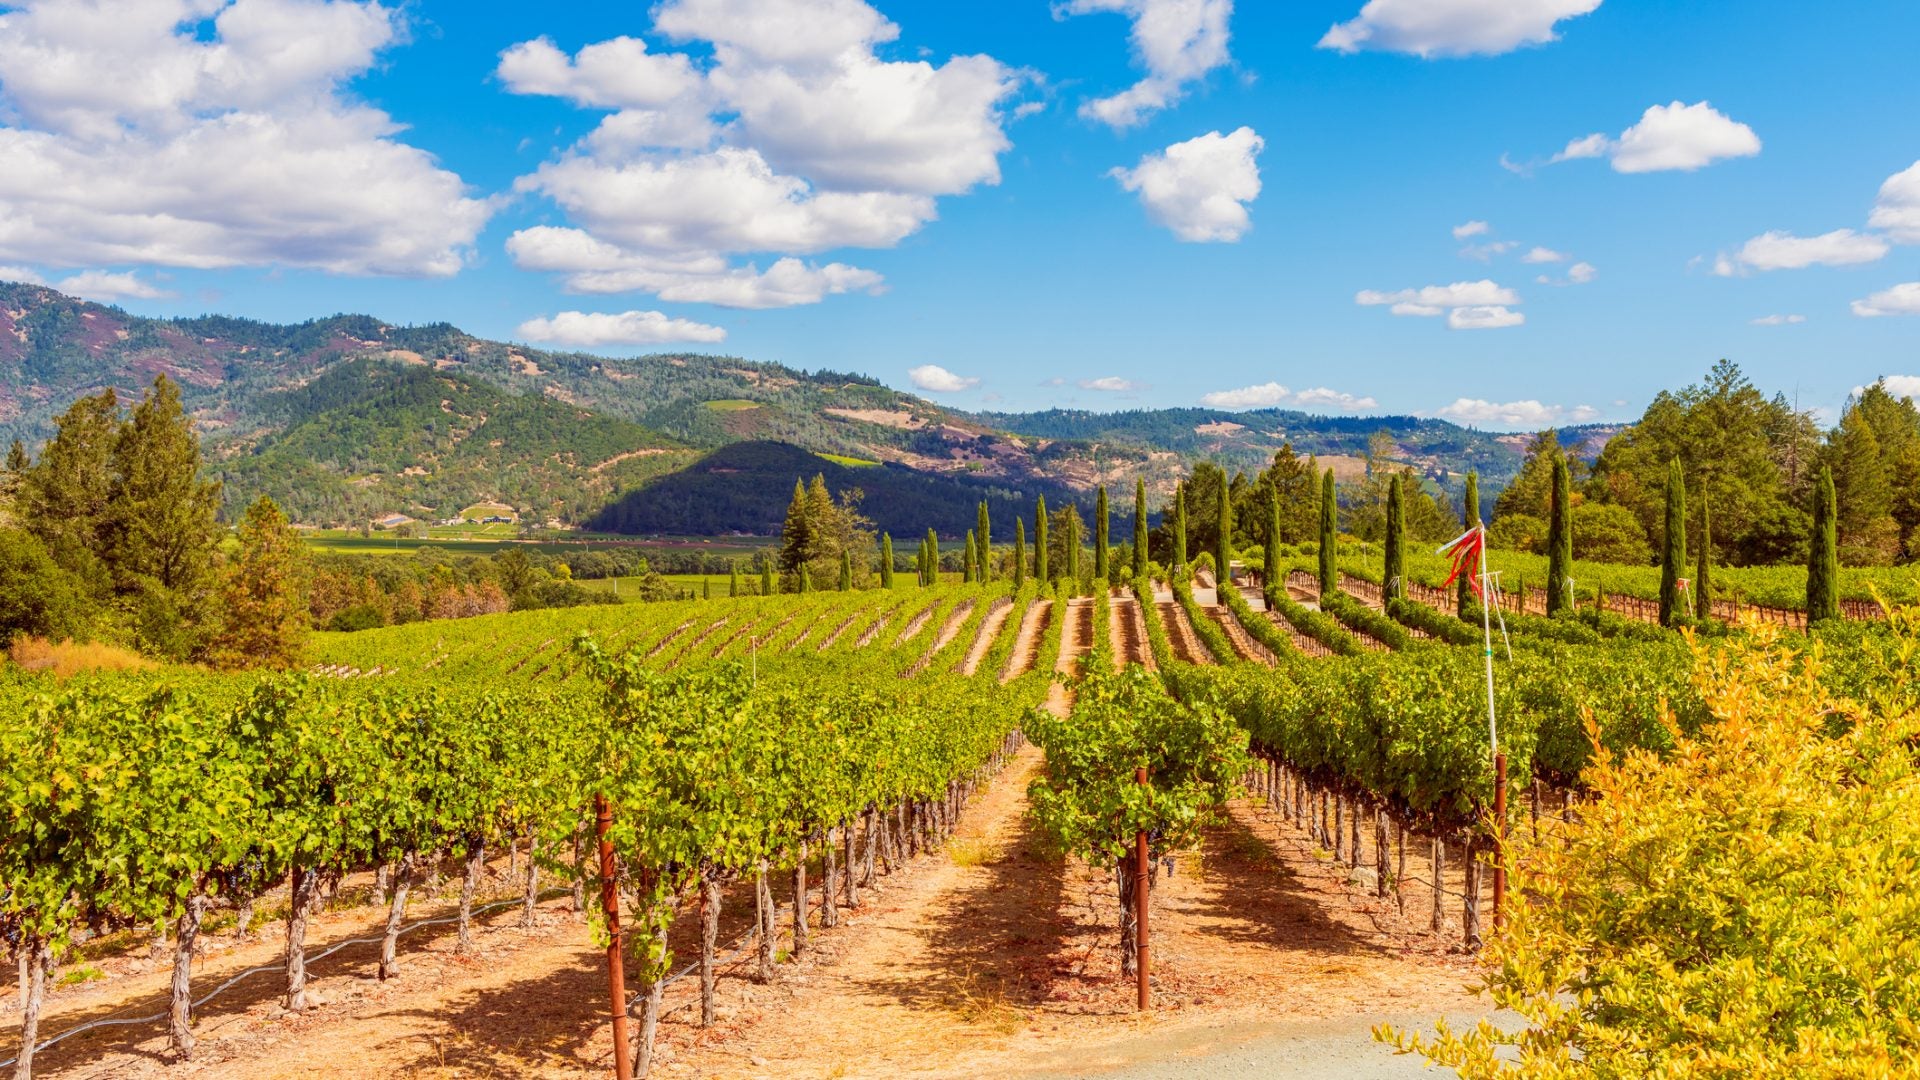 Get Lost: Spend A Wine Weekend In Napa Valley